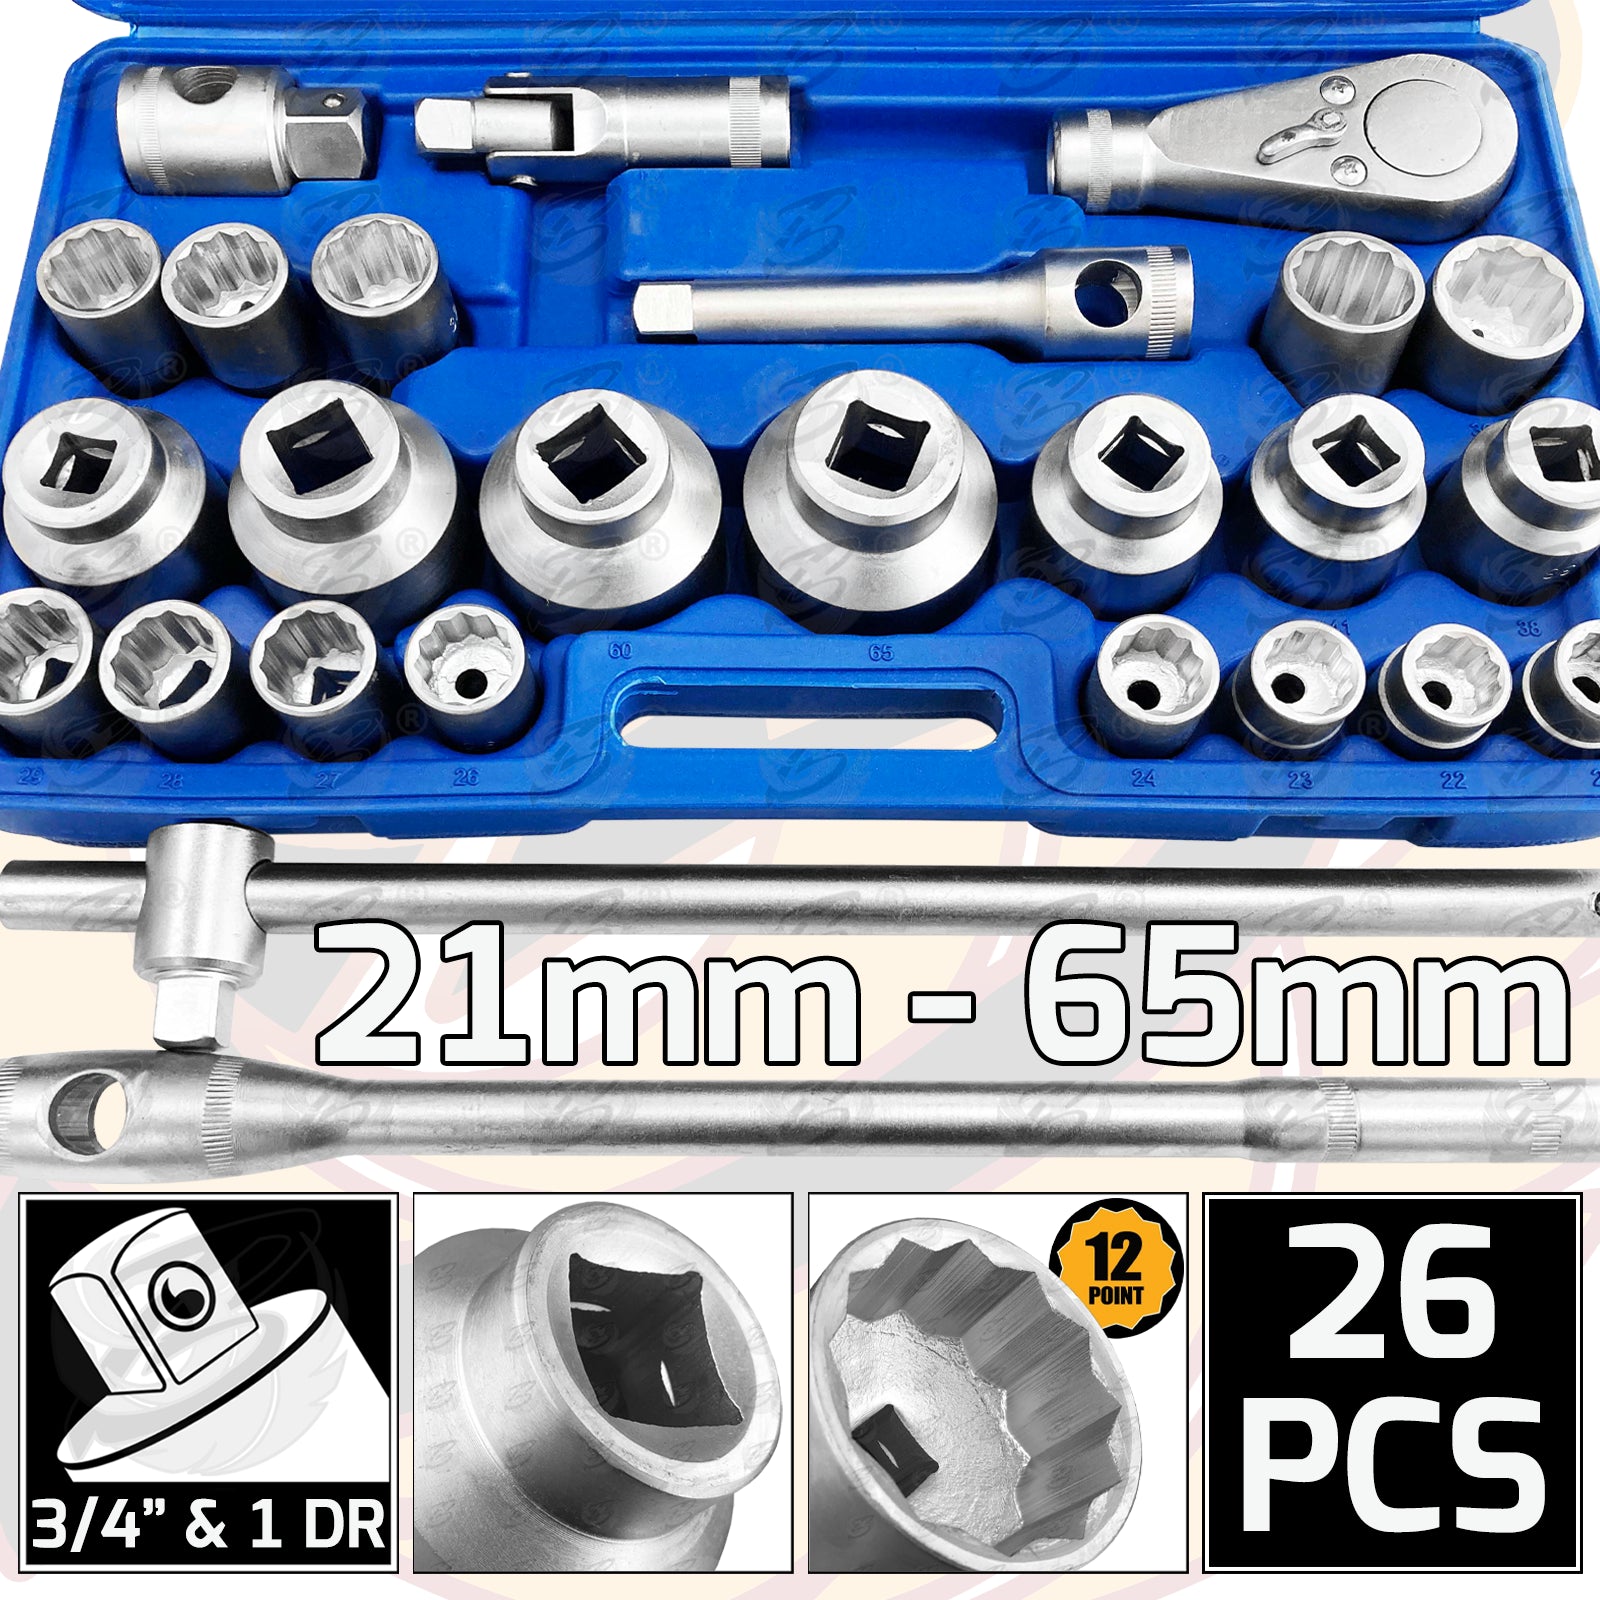 TOOLZONE 26PC 3/4" & 1" DRIVE 12 POINT SOCKET SET 21MM - 65MM